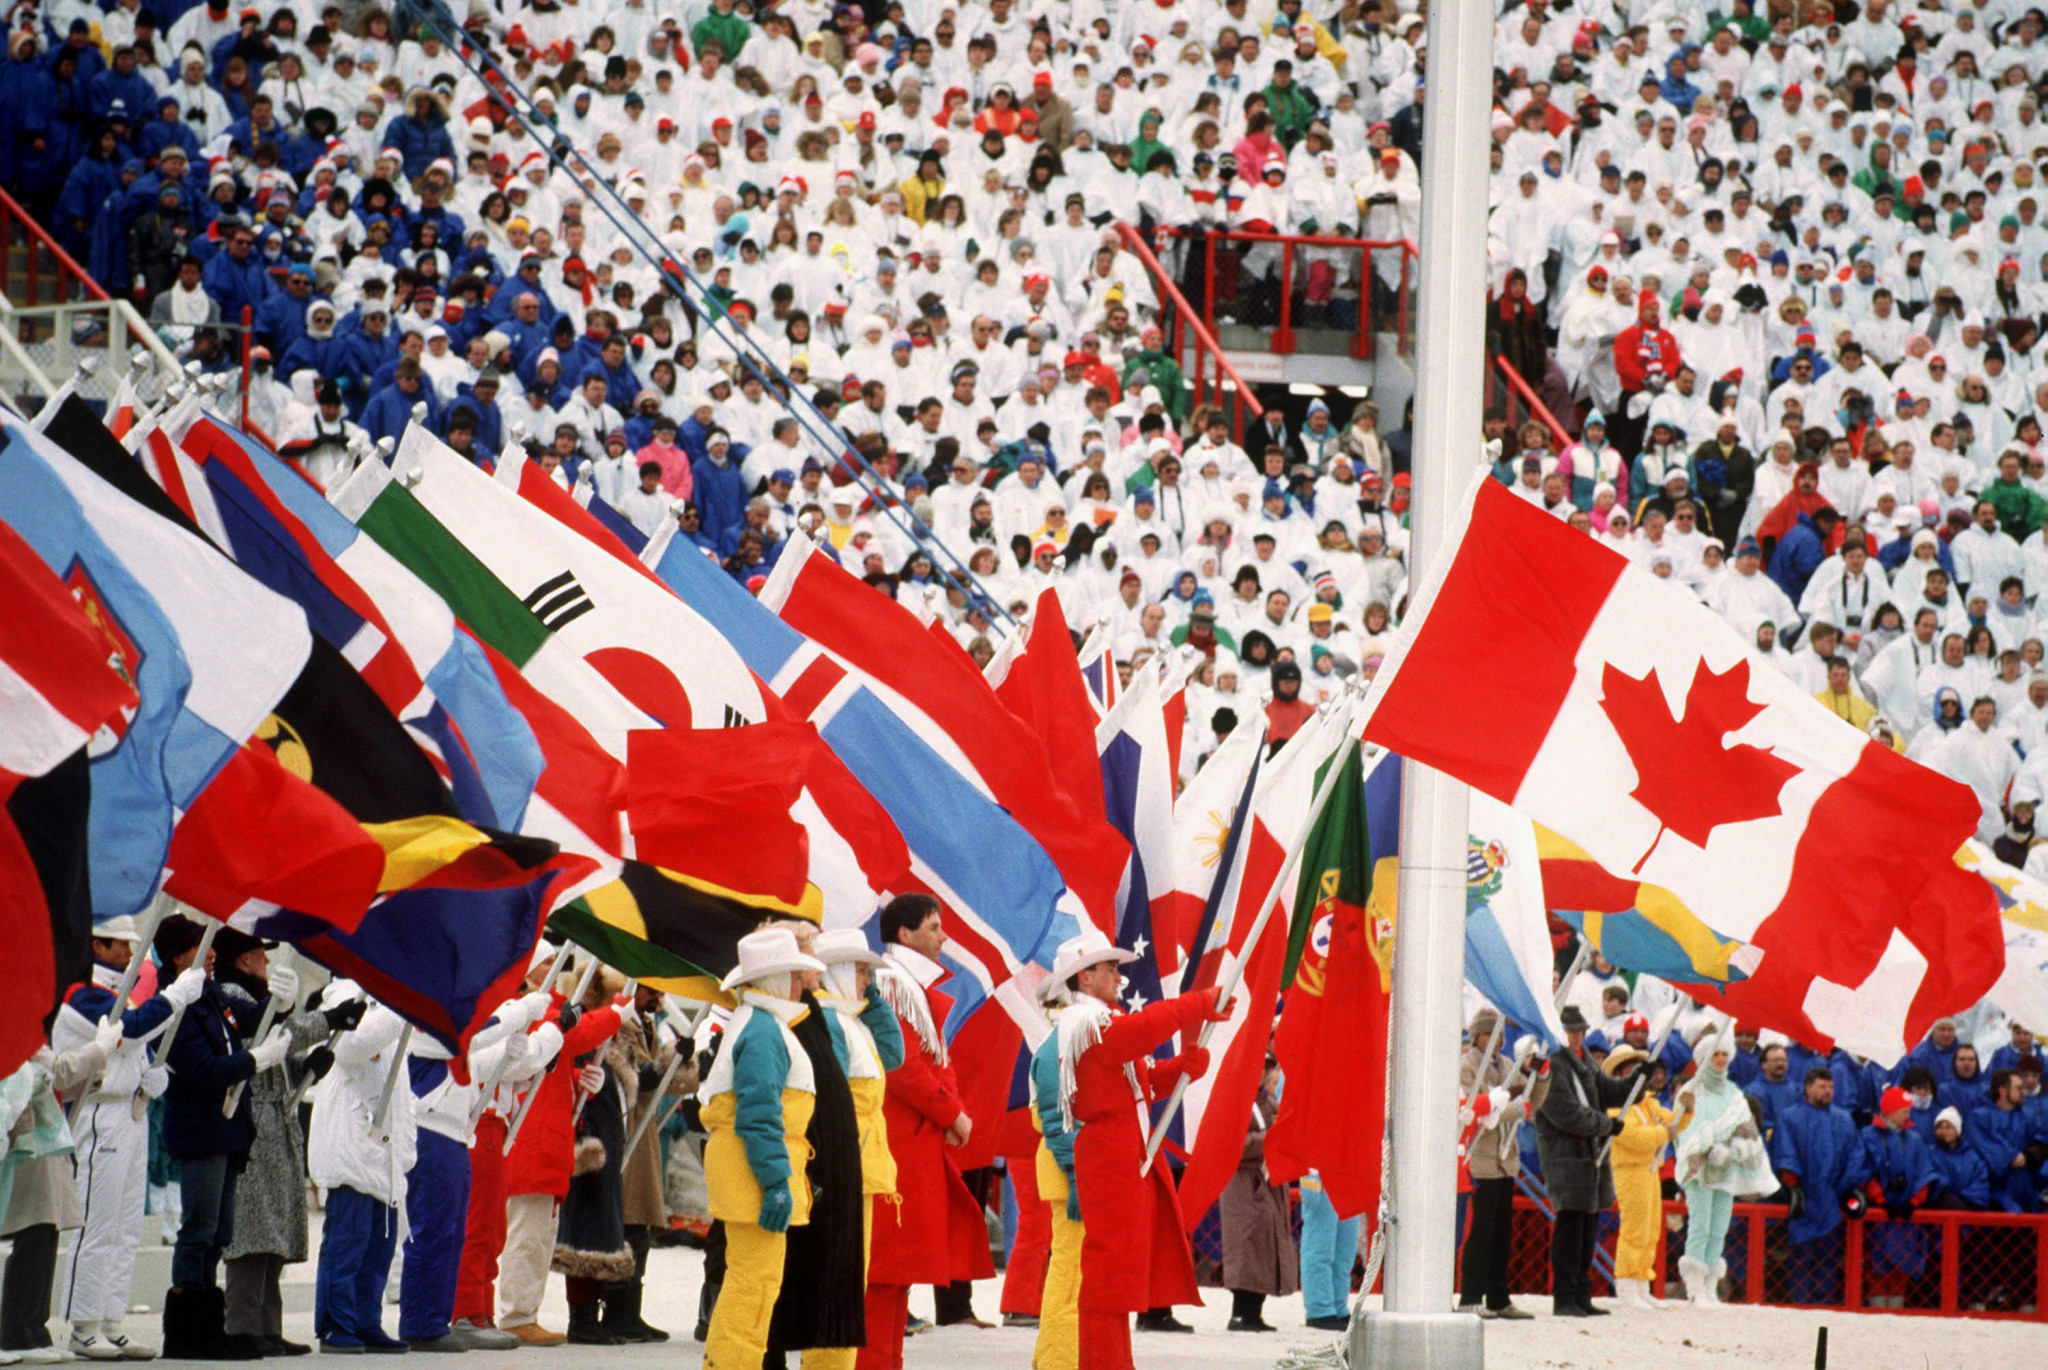 Calgary previously hosted the Winter Olympics in 1988 ©Getty Images